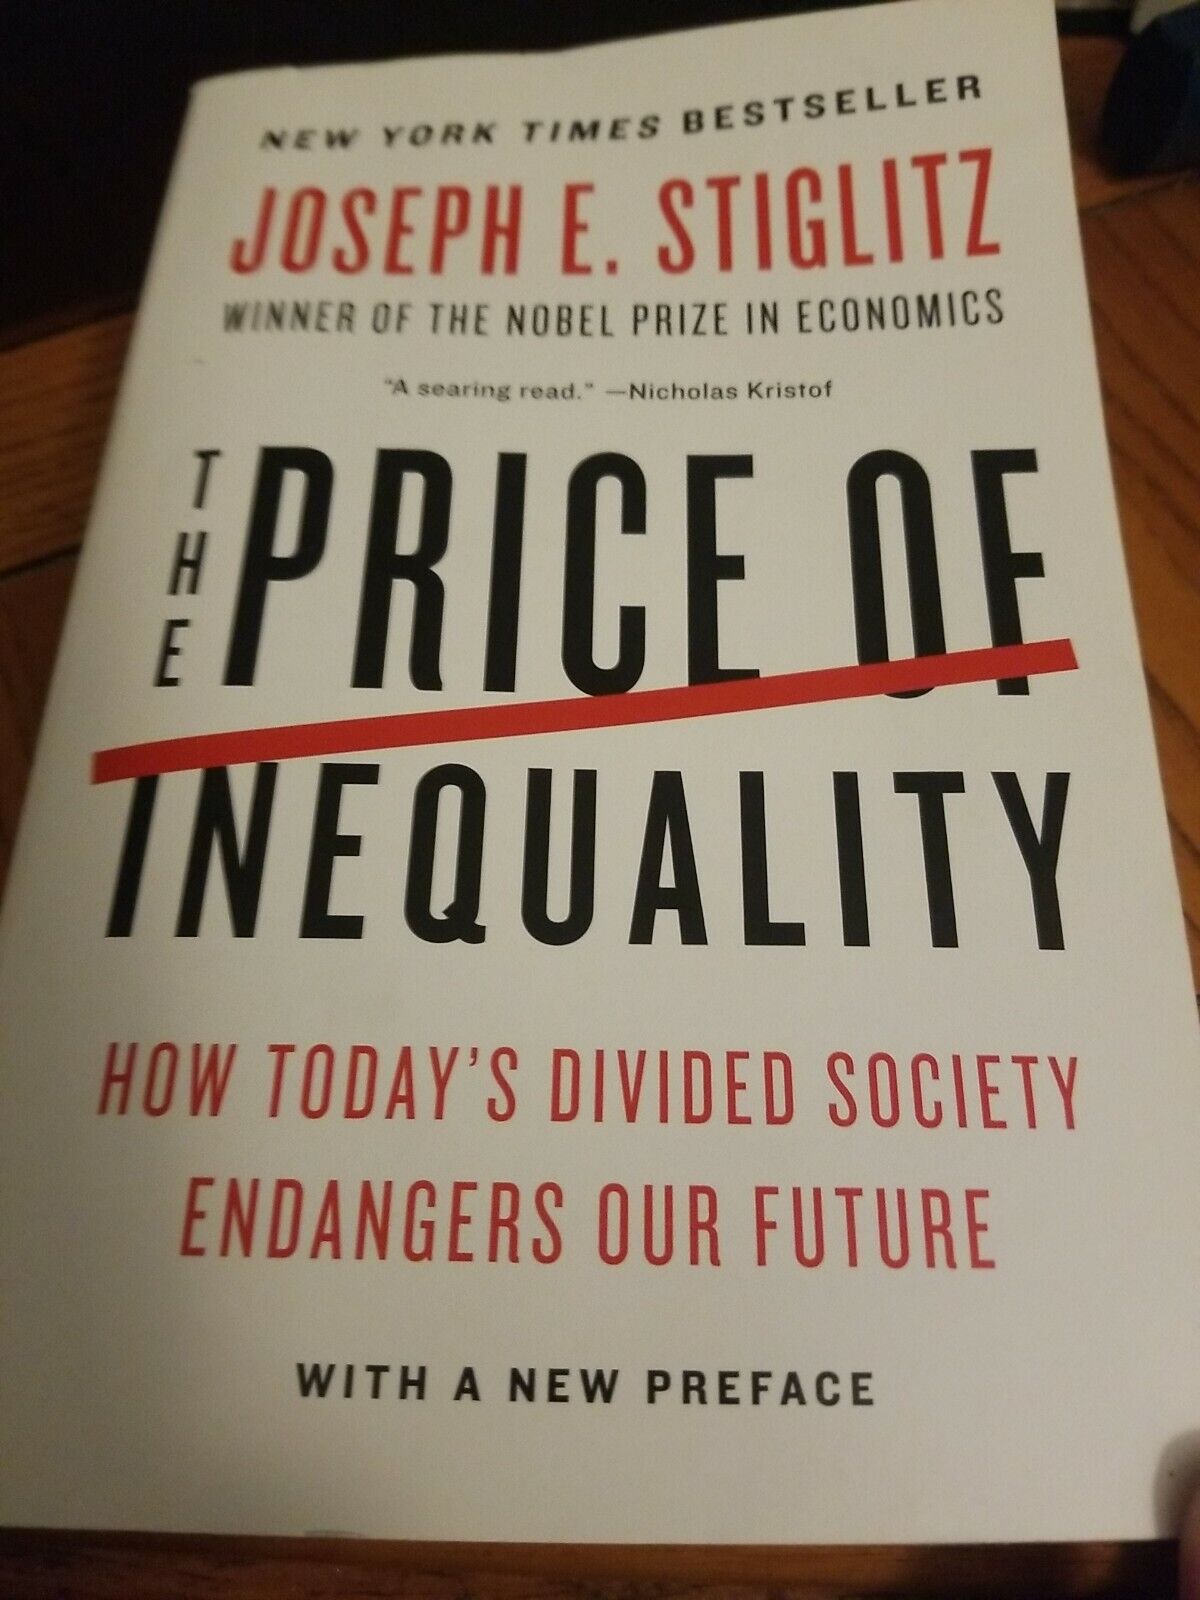 How　Our　Society　Today#039;s　The　Endangers　Future　by　of　9780393345063　eBay　Price　Divided　Inequality　J…